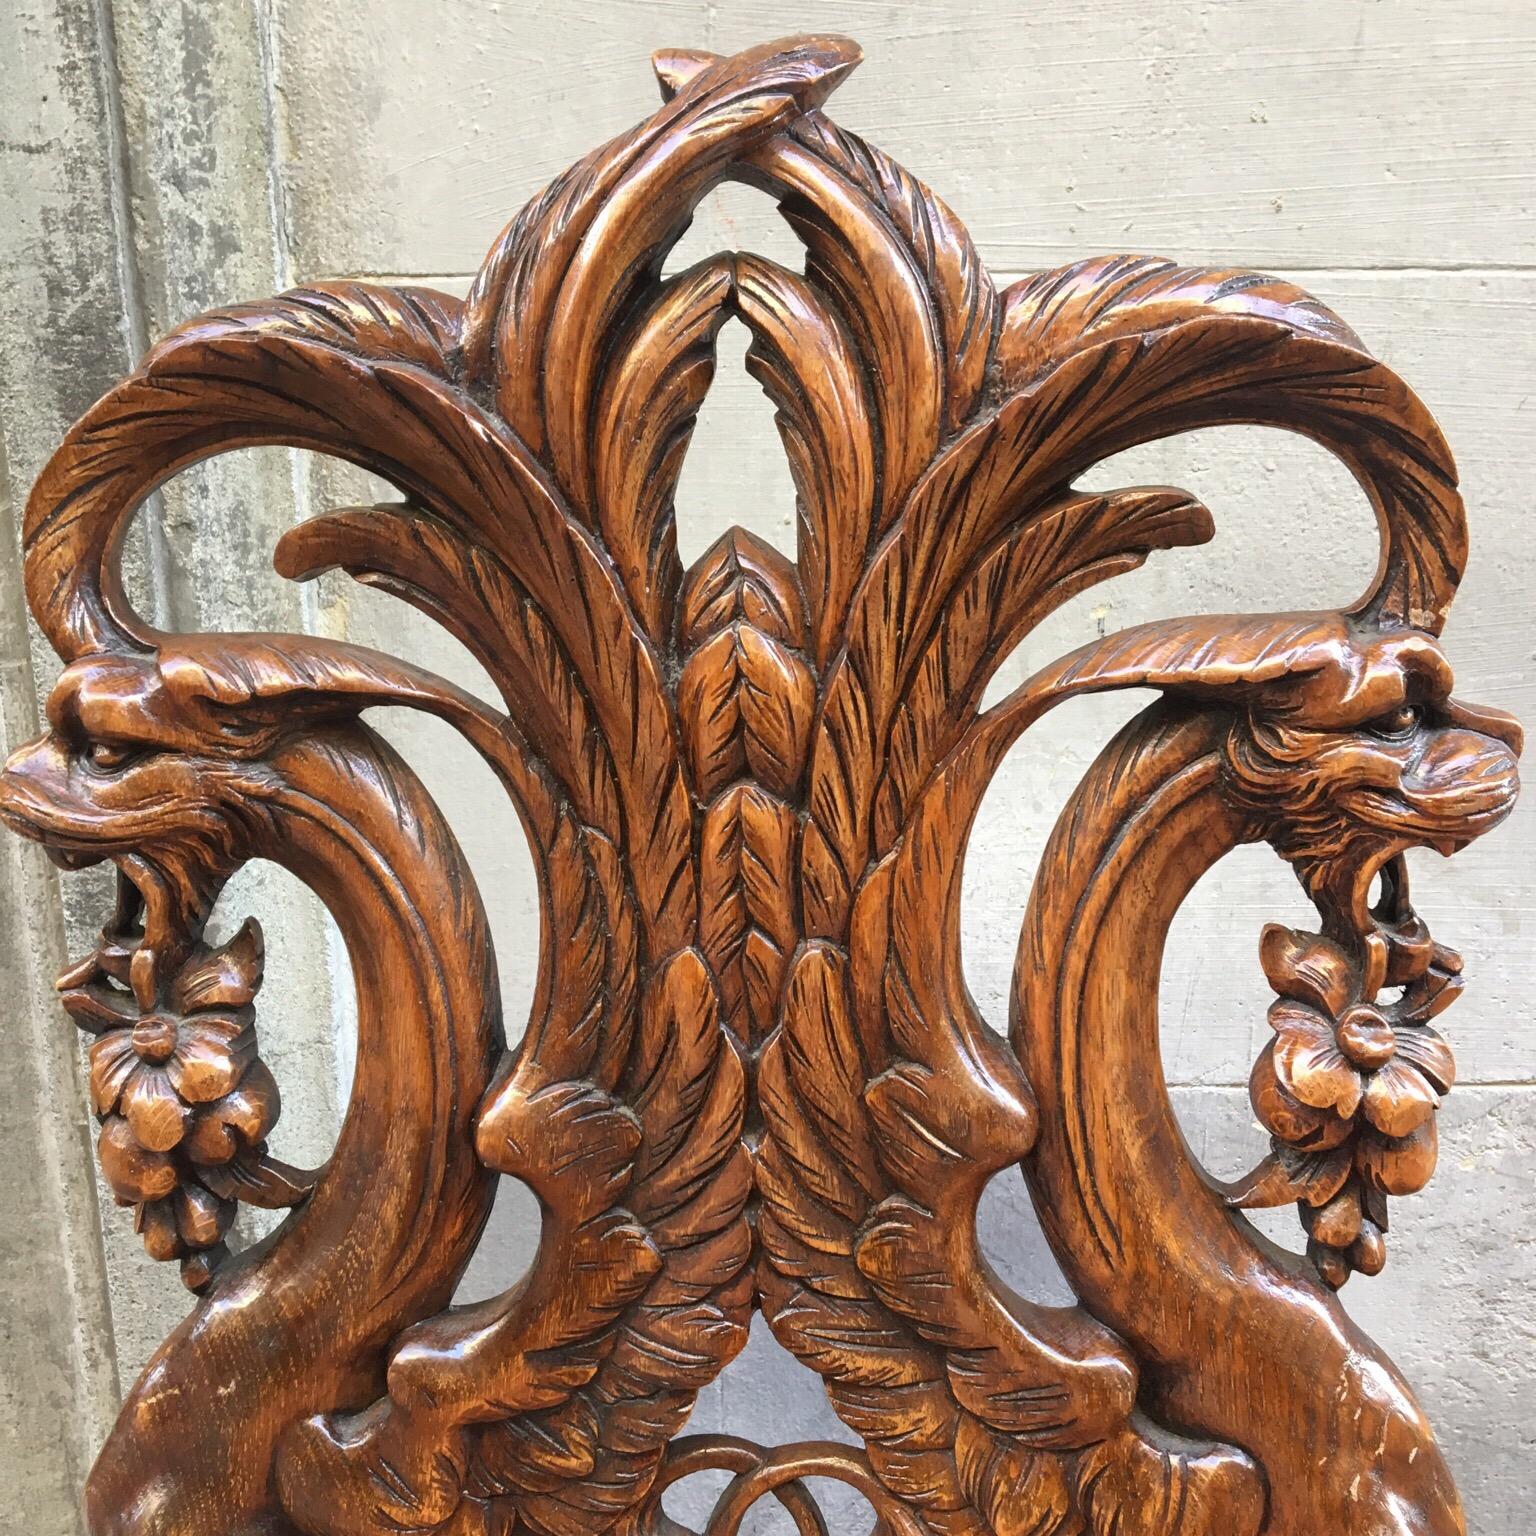 20th Century Pair of Carved Renaissance-Style Wooden Chairs Orange Alcantara Seat, Early 1900